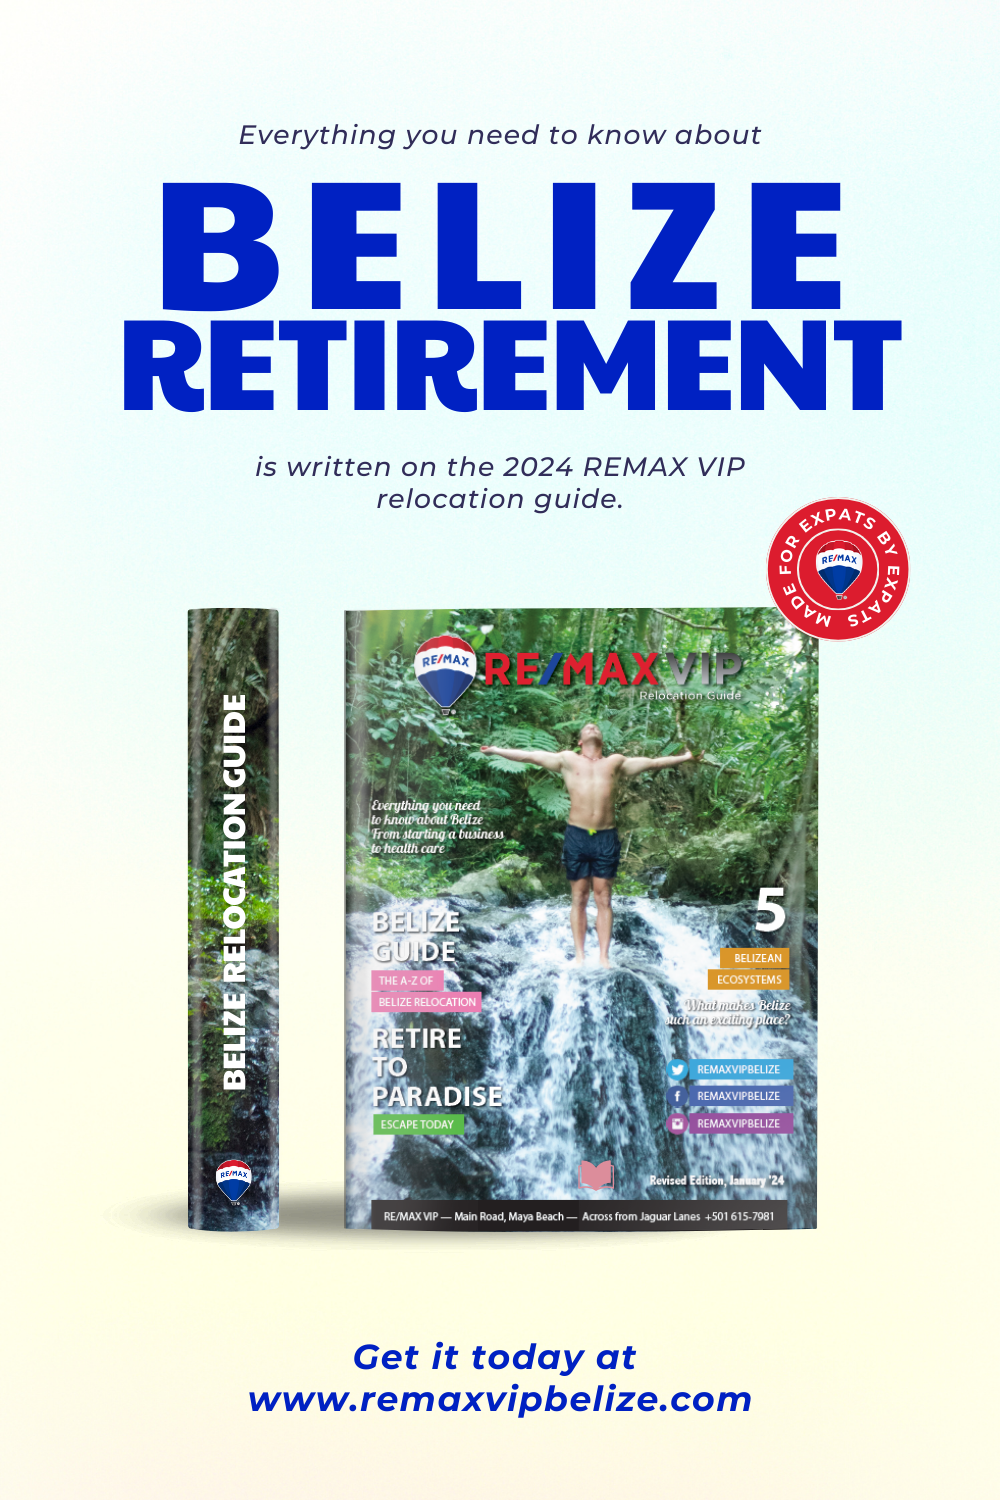 Everything you need to know about Belize retirement is written on the 2024 Belize Relocation Guide by REMAX VIP